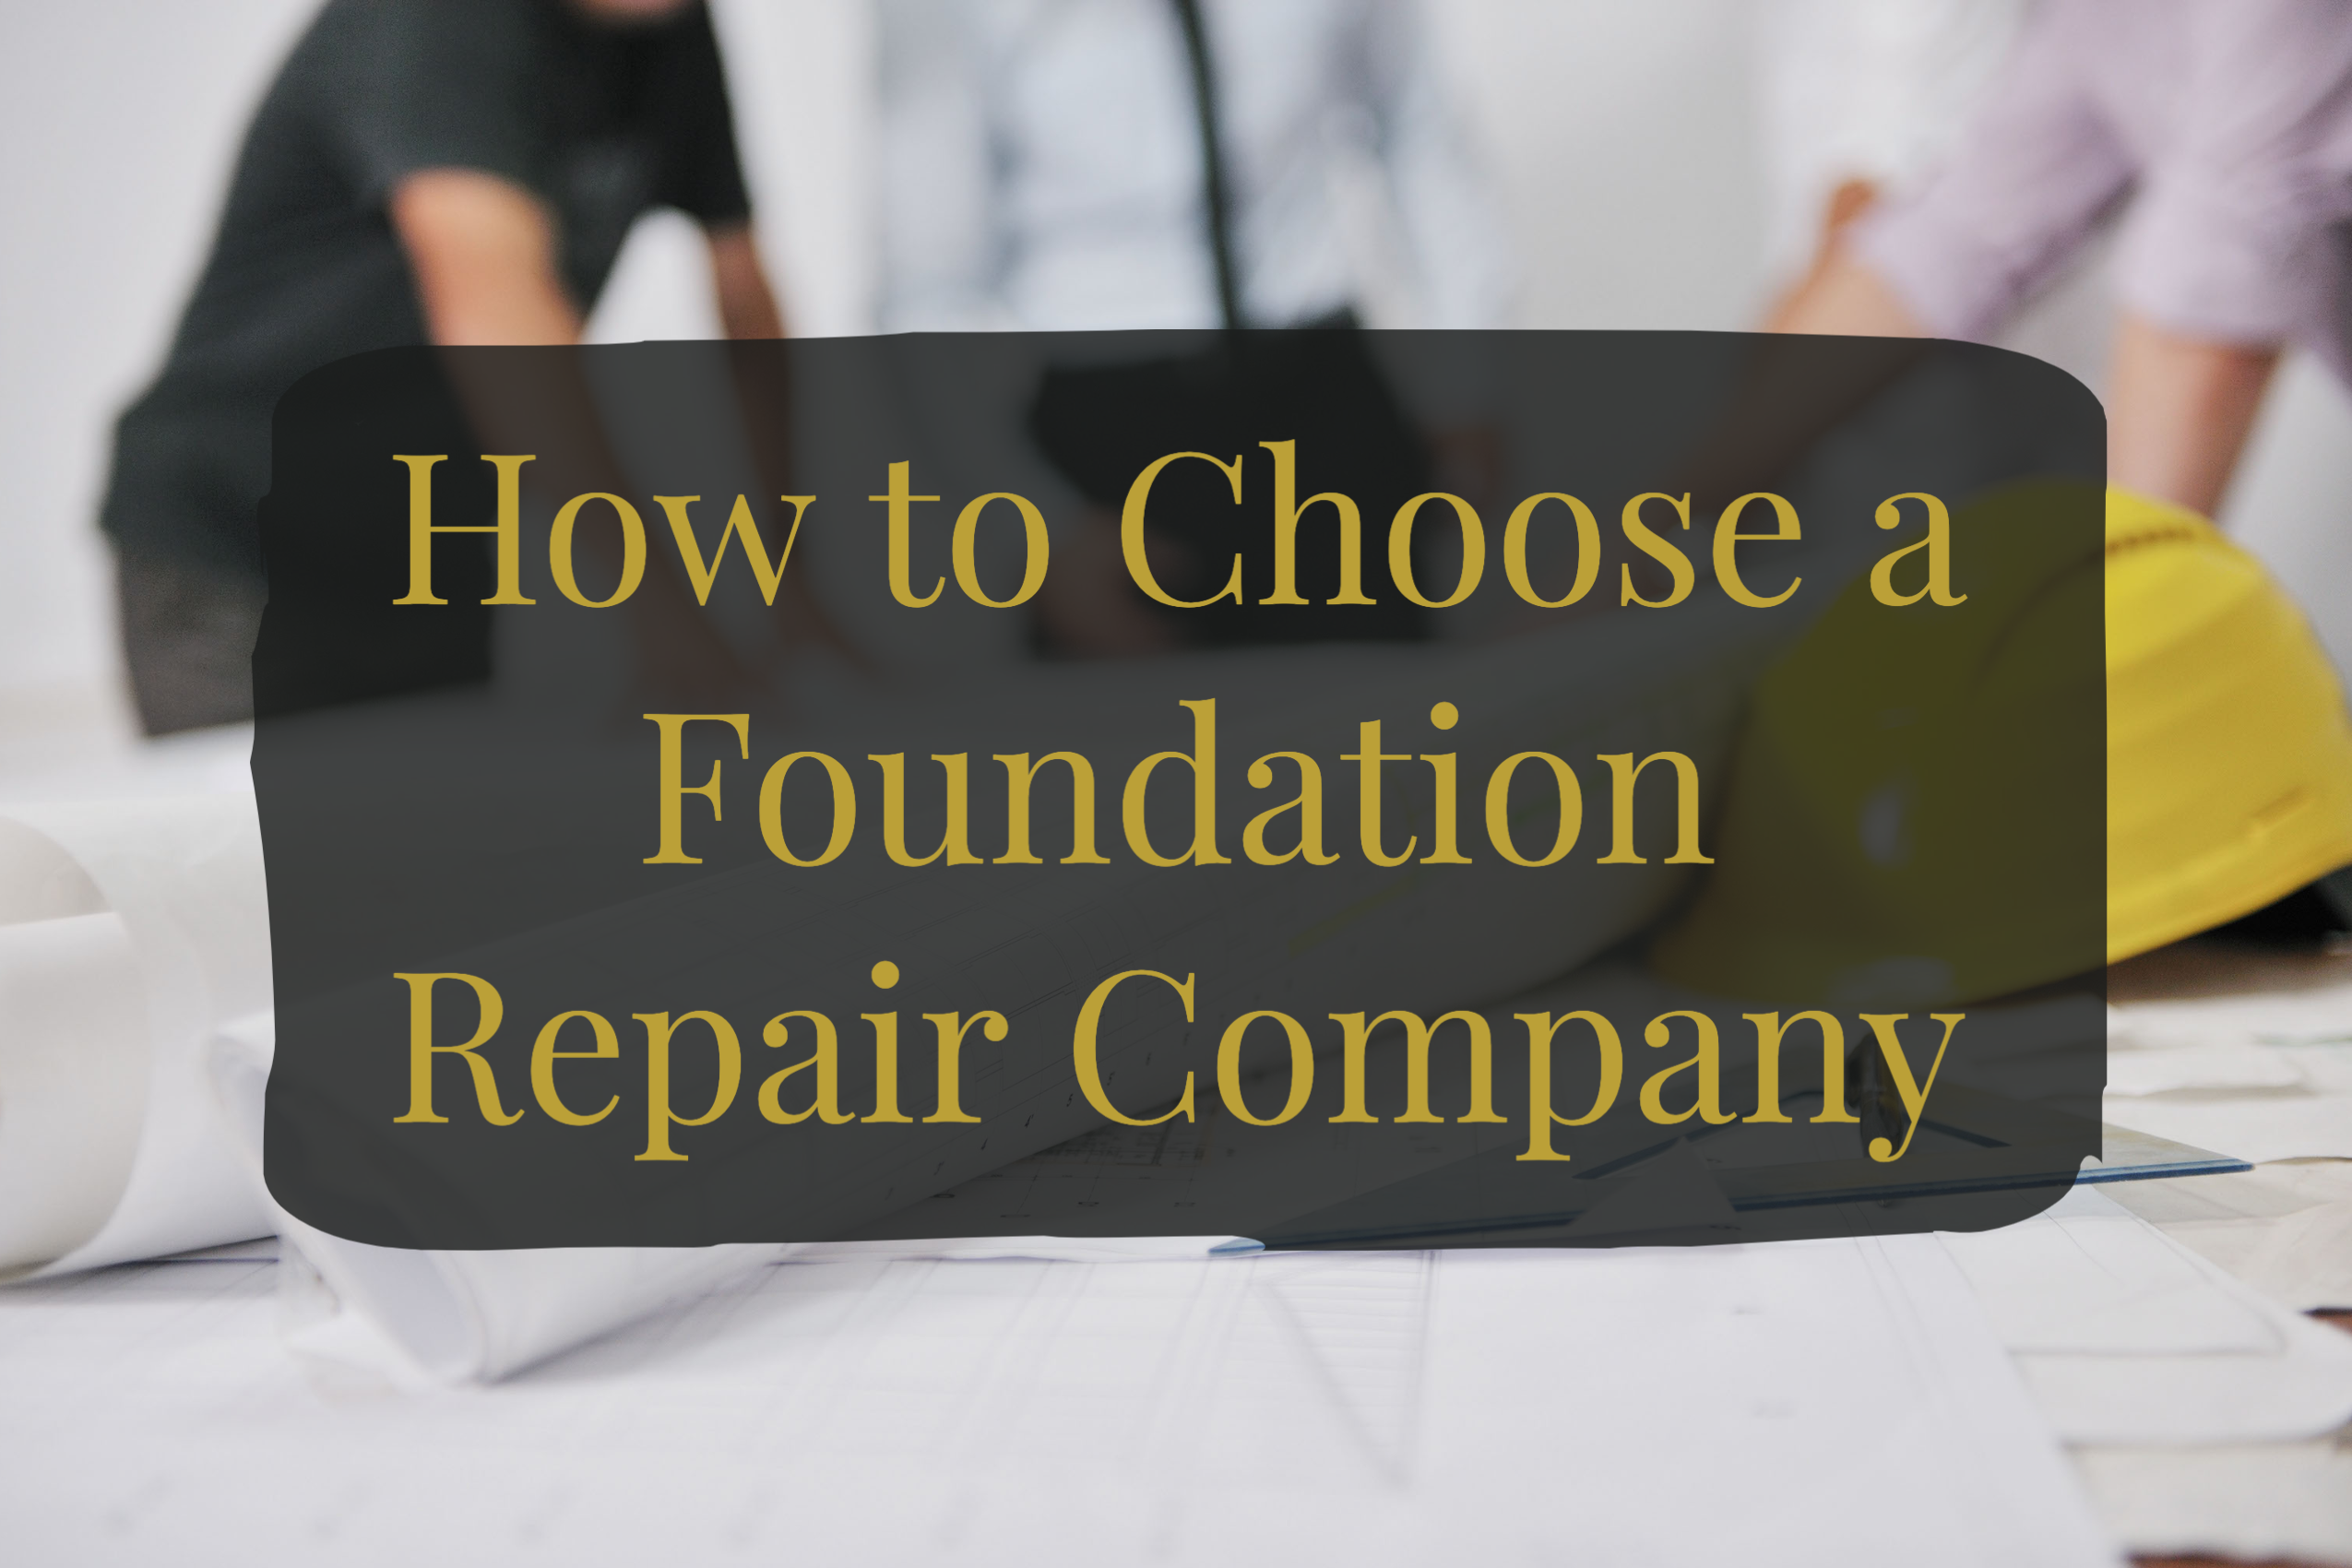 How to Choose a Foundation Repair Company